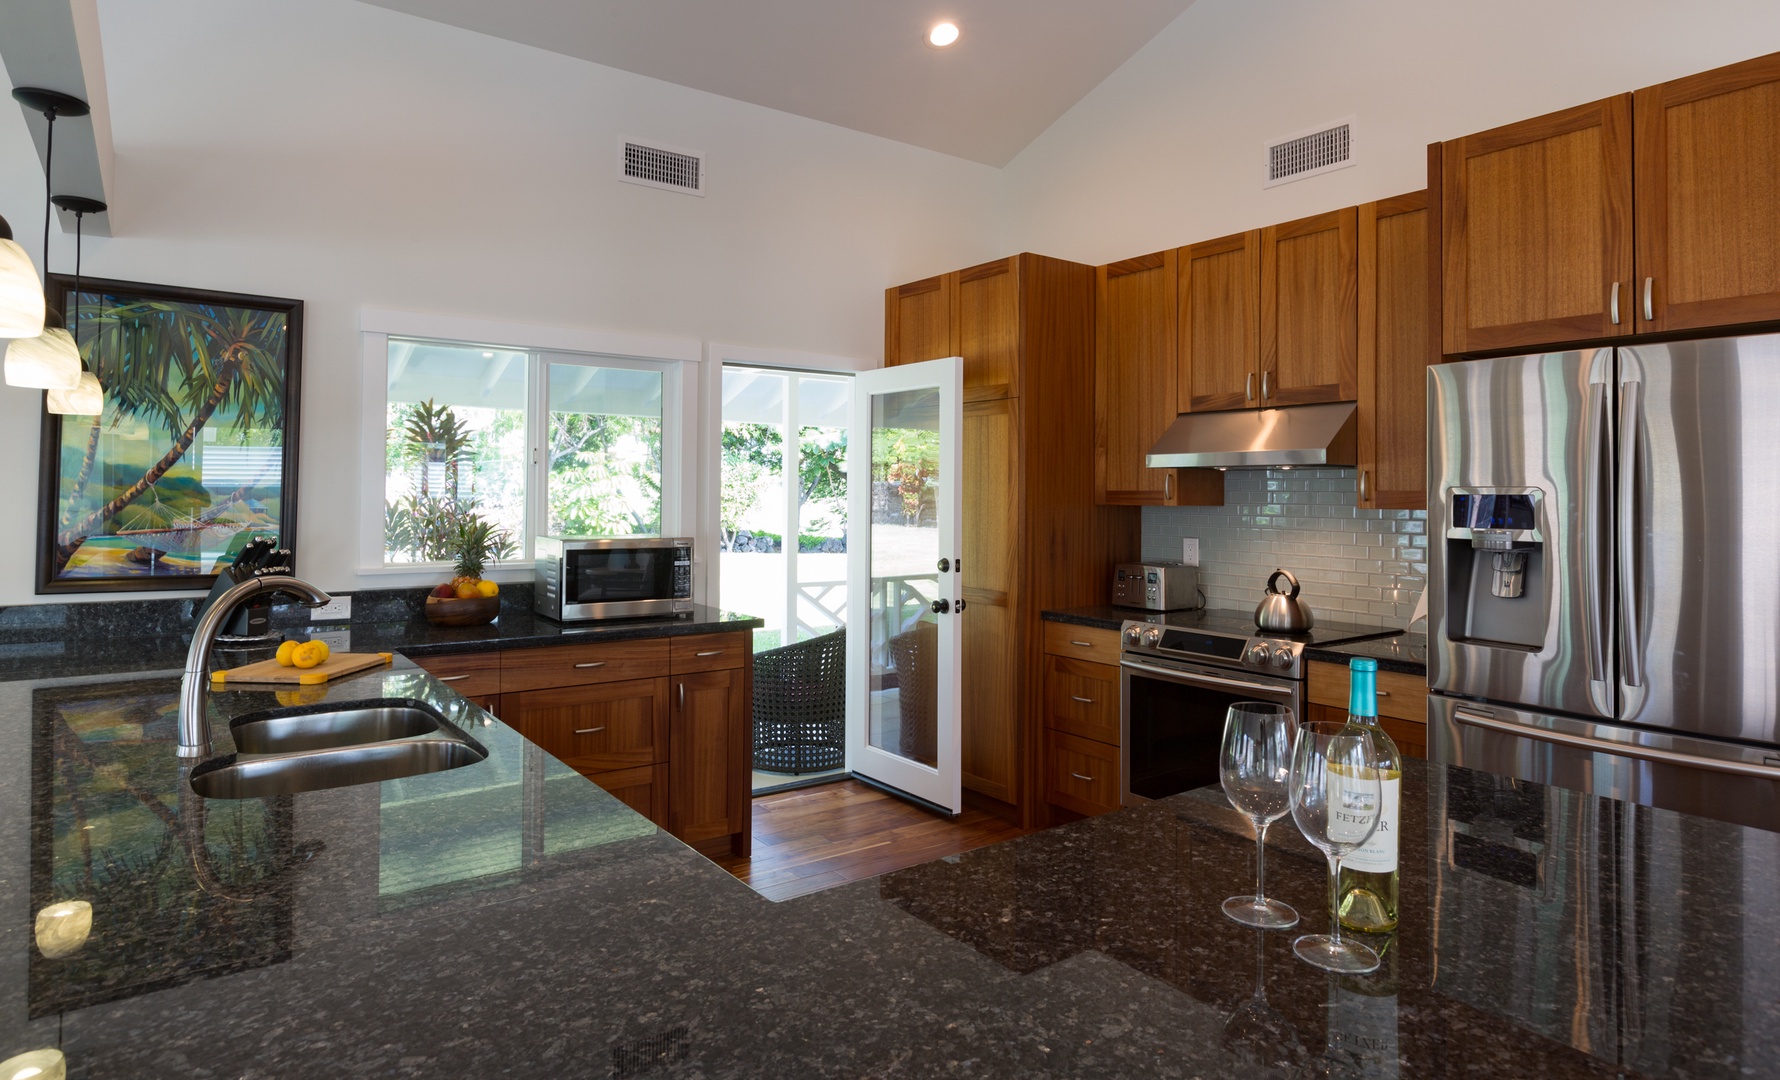 Kailua Kona Vacation Rentals, He'eia Bay Beach Bungalow (Big Island) - Everything you need for meals at home.